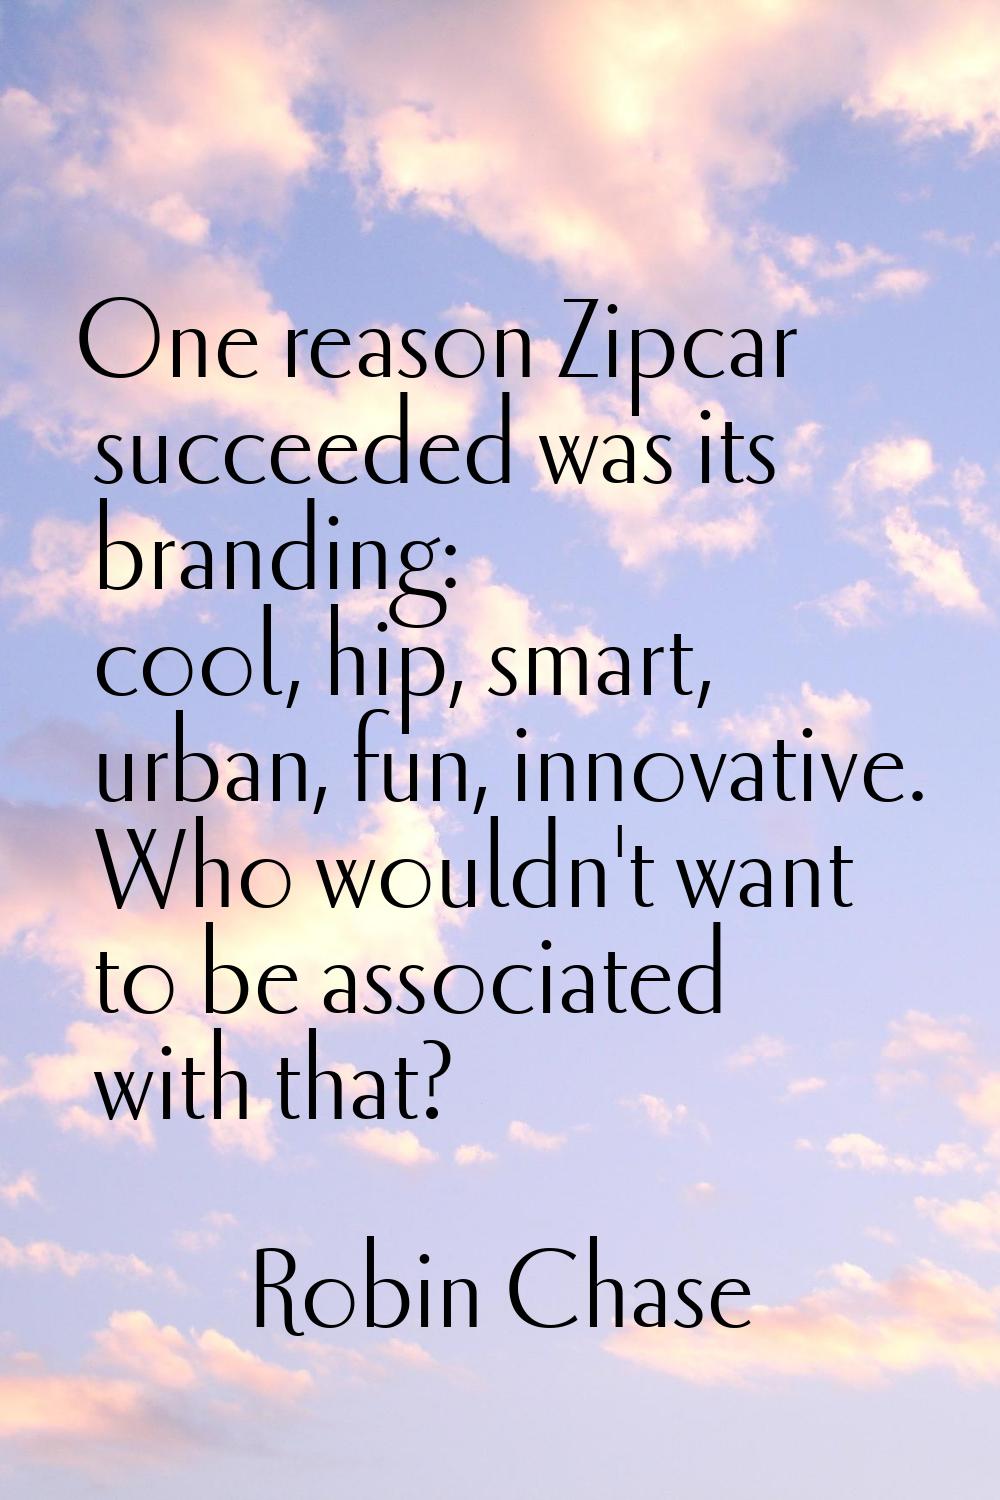 One reason Zipcar succeeded was its branding: cool, hip, smart, urban, fun, innovative. Who wouldn'